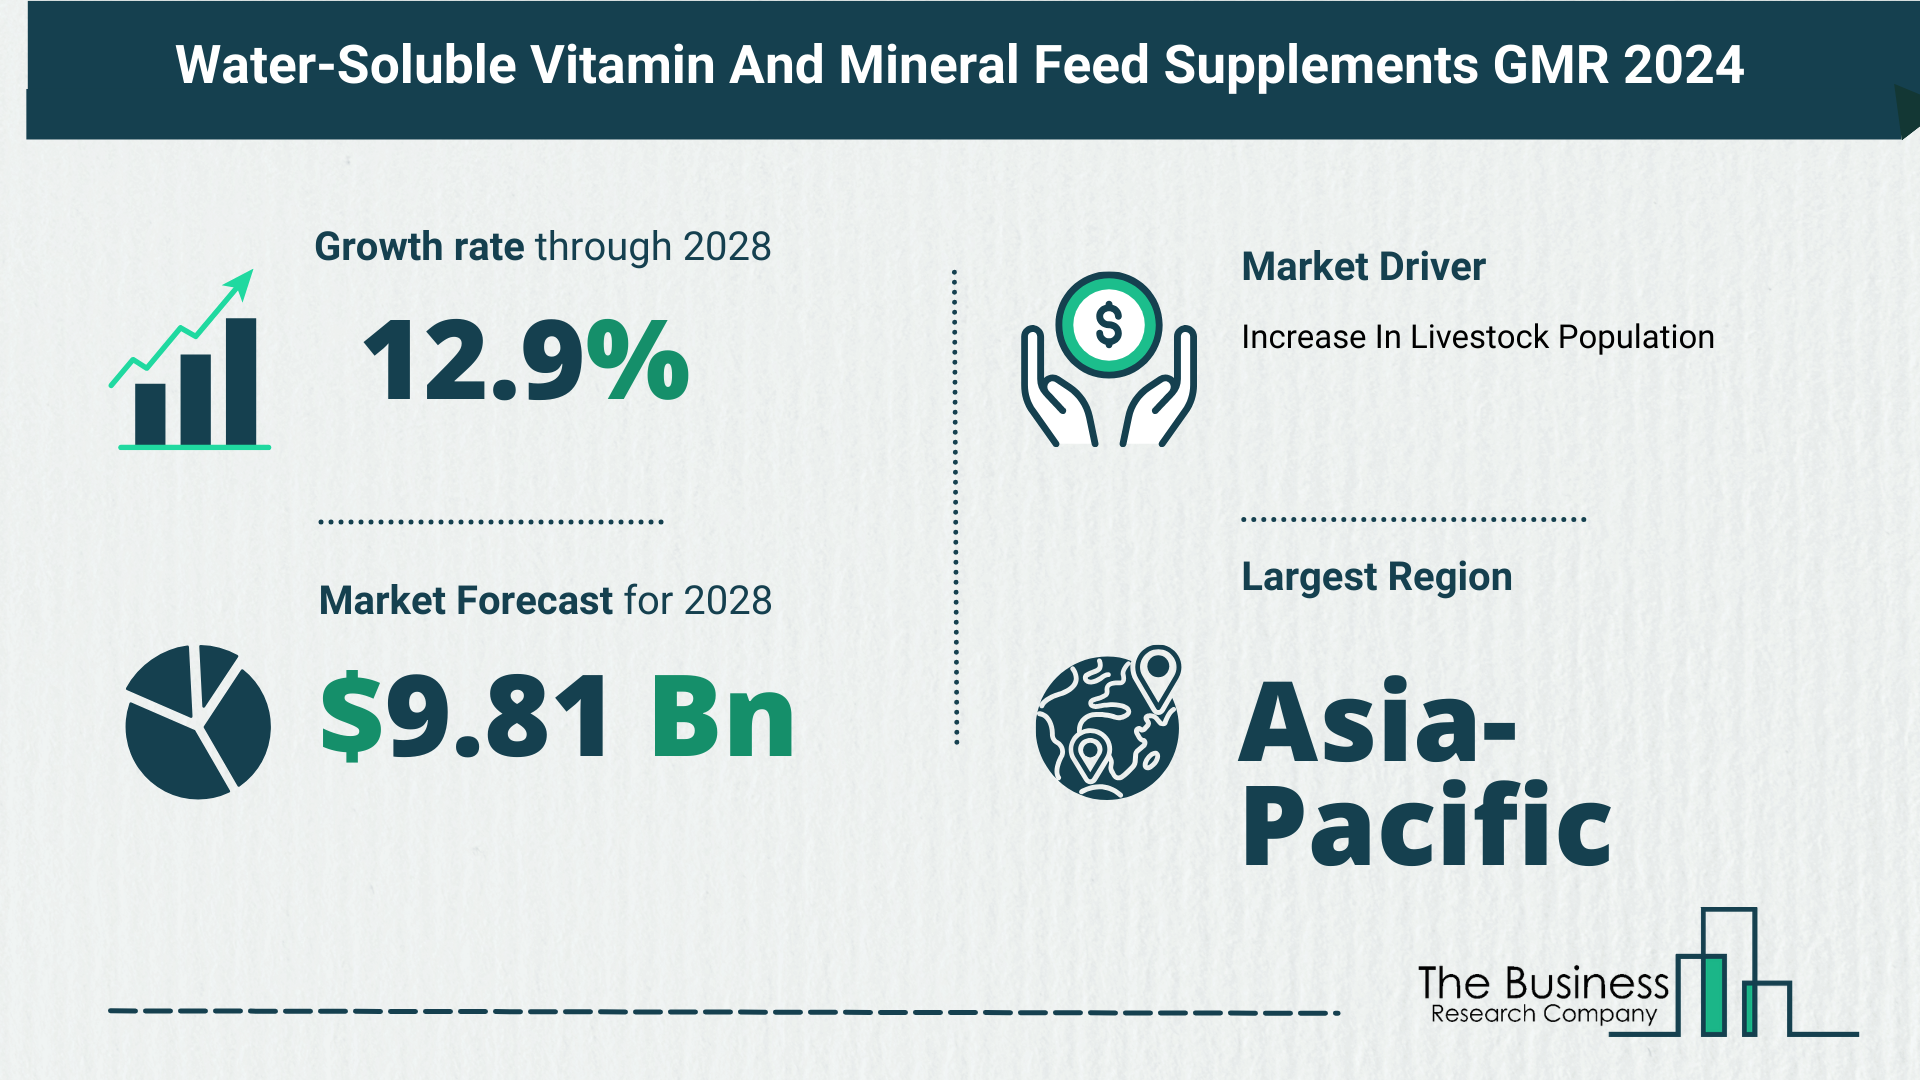 Overview Of The Water-Soluble Vitamin And Mineral Feed Supplements Market 2024: Size, Drivers, And Trends